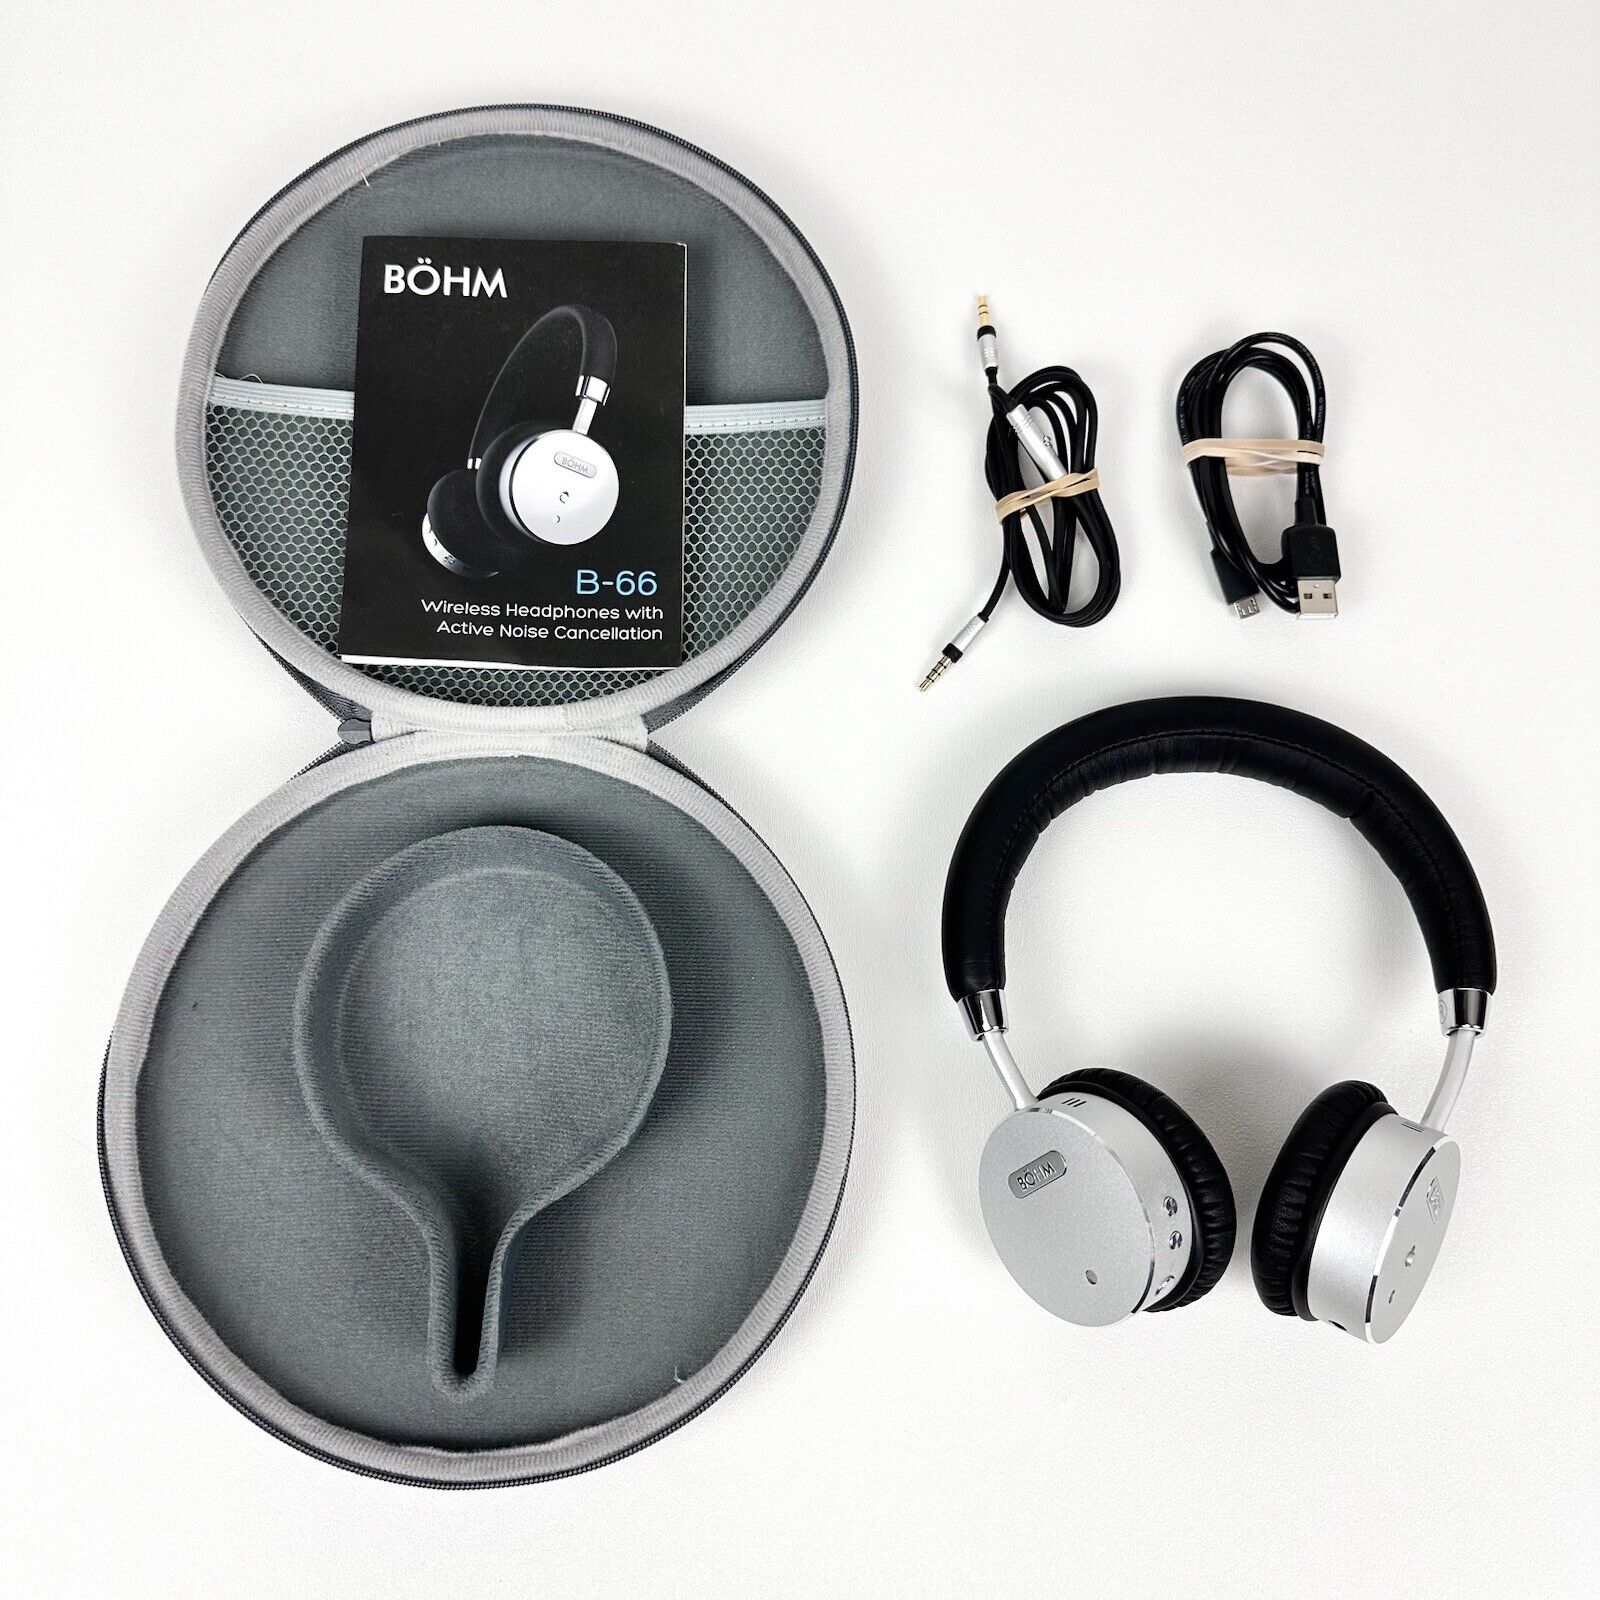 Böhm Wireless Bluetooth Headphones Review - Superior Sound And Unmatched Comfort